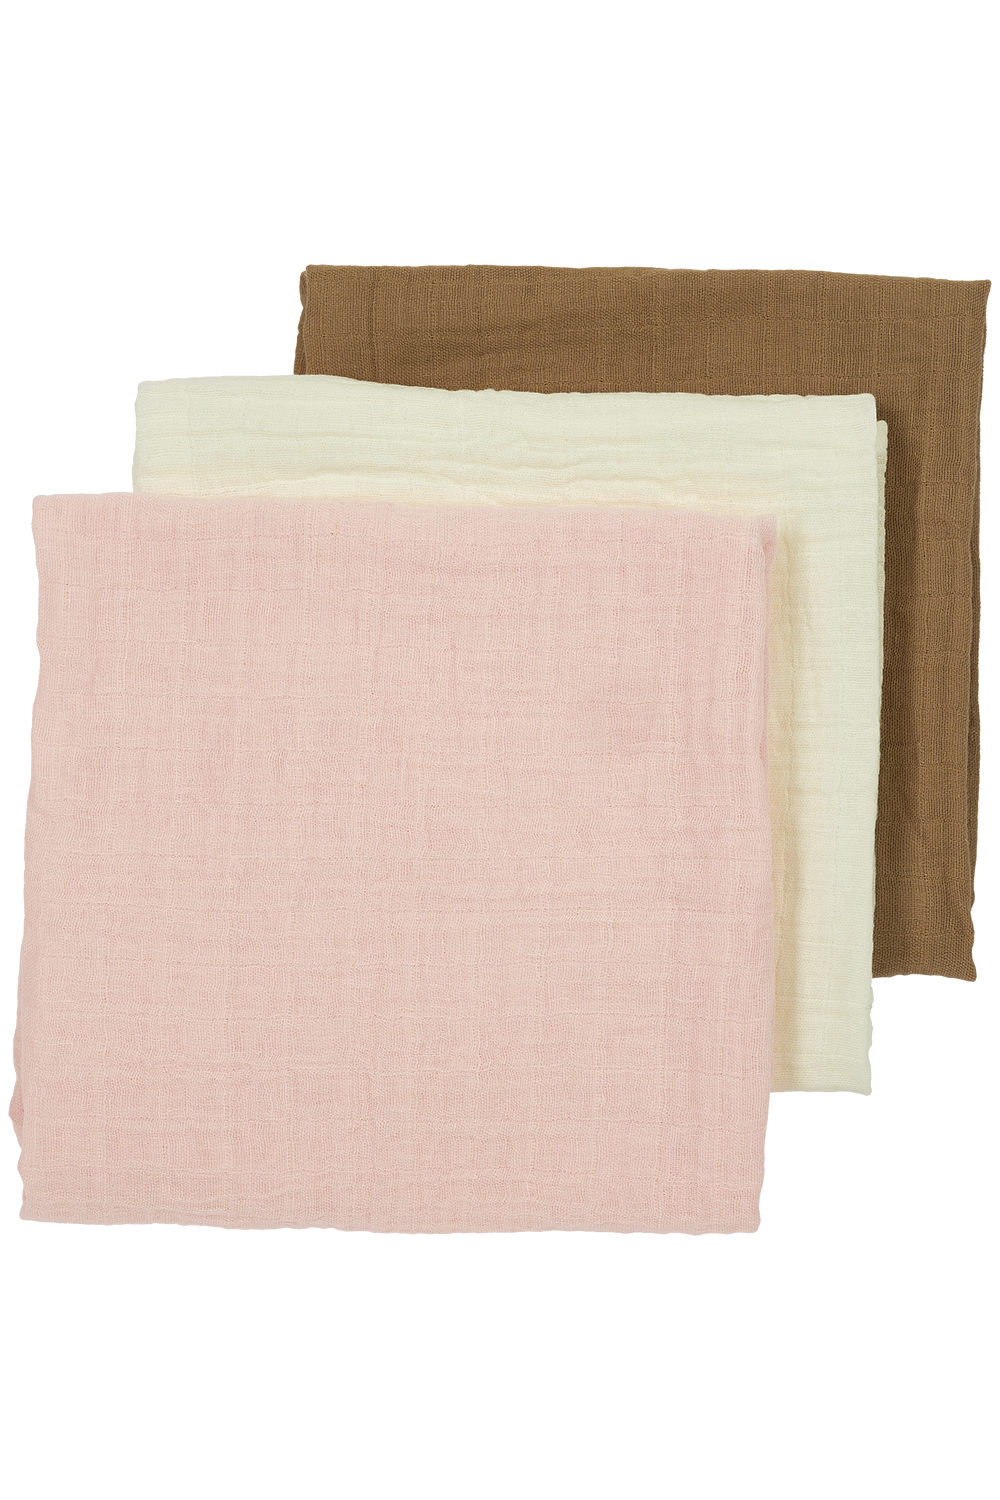 Musselin Mullwindeln 3er pack Uni - offwhite/soft pink/toffee - 70x70cm